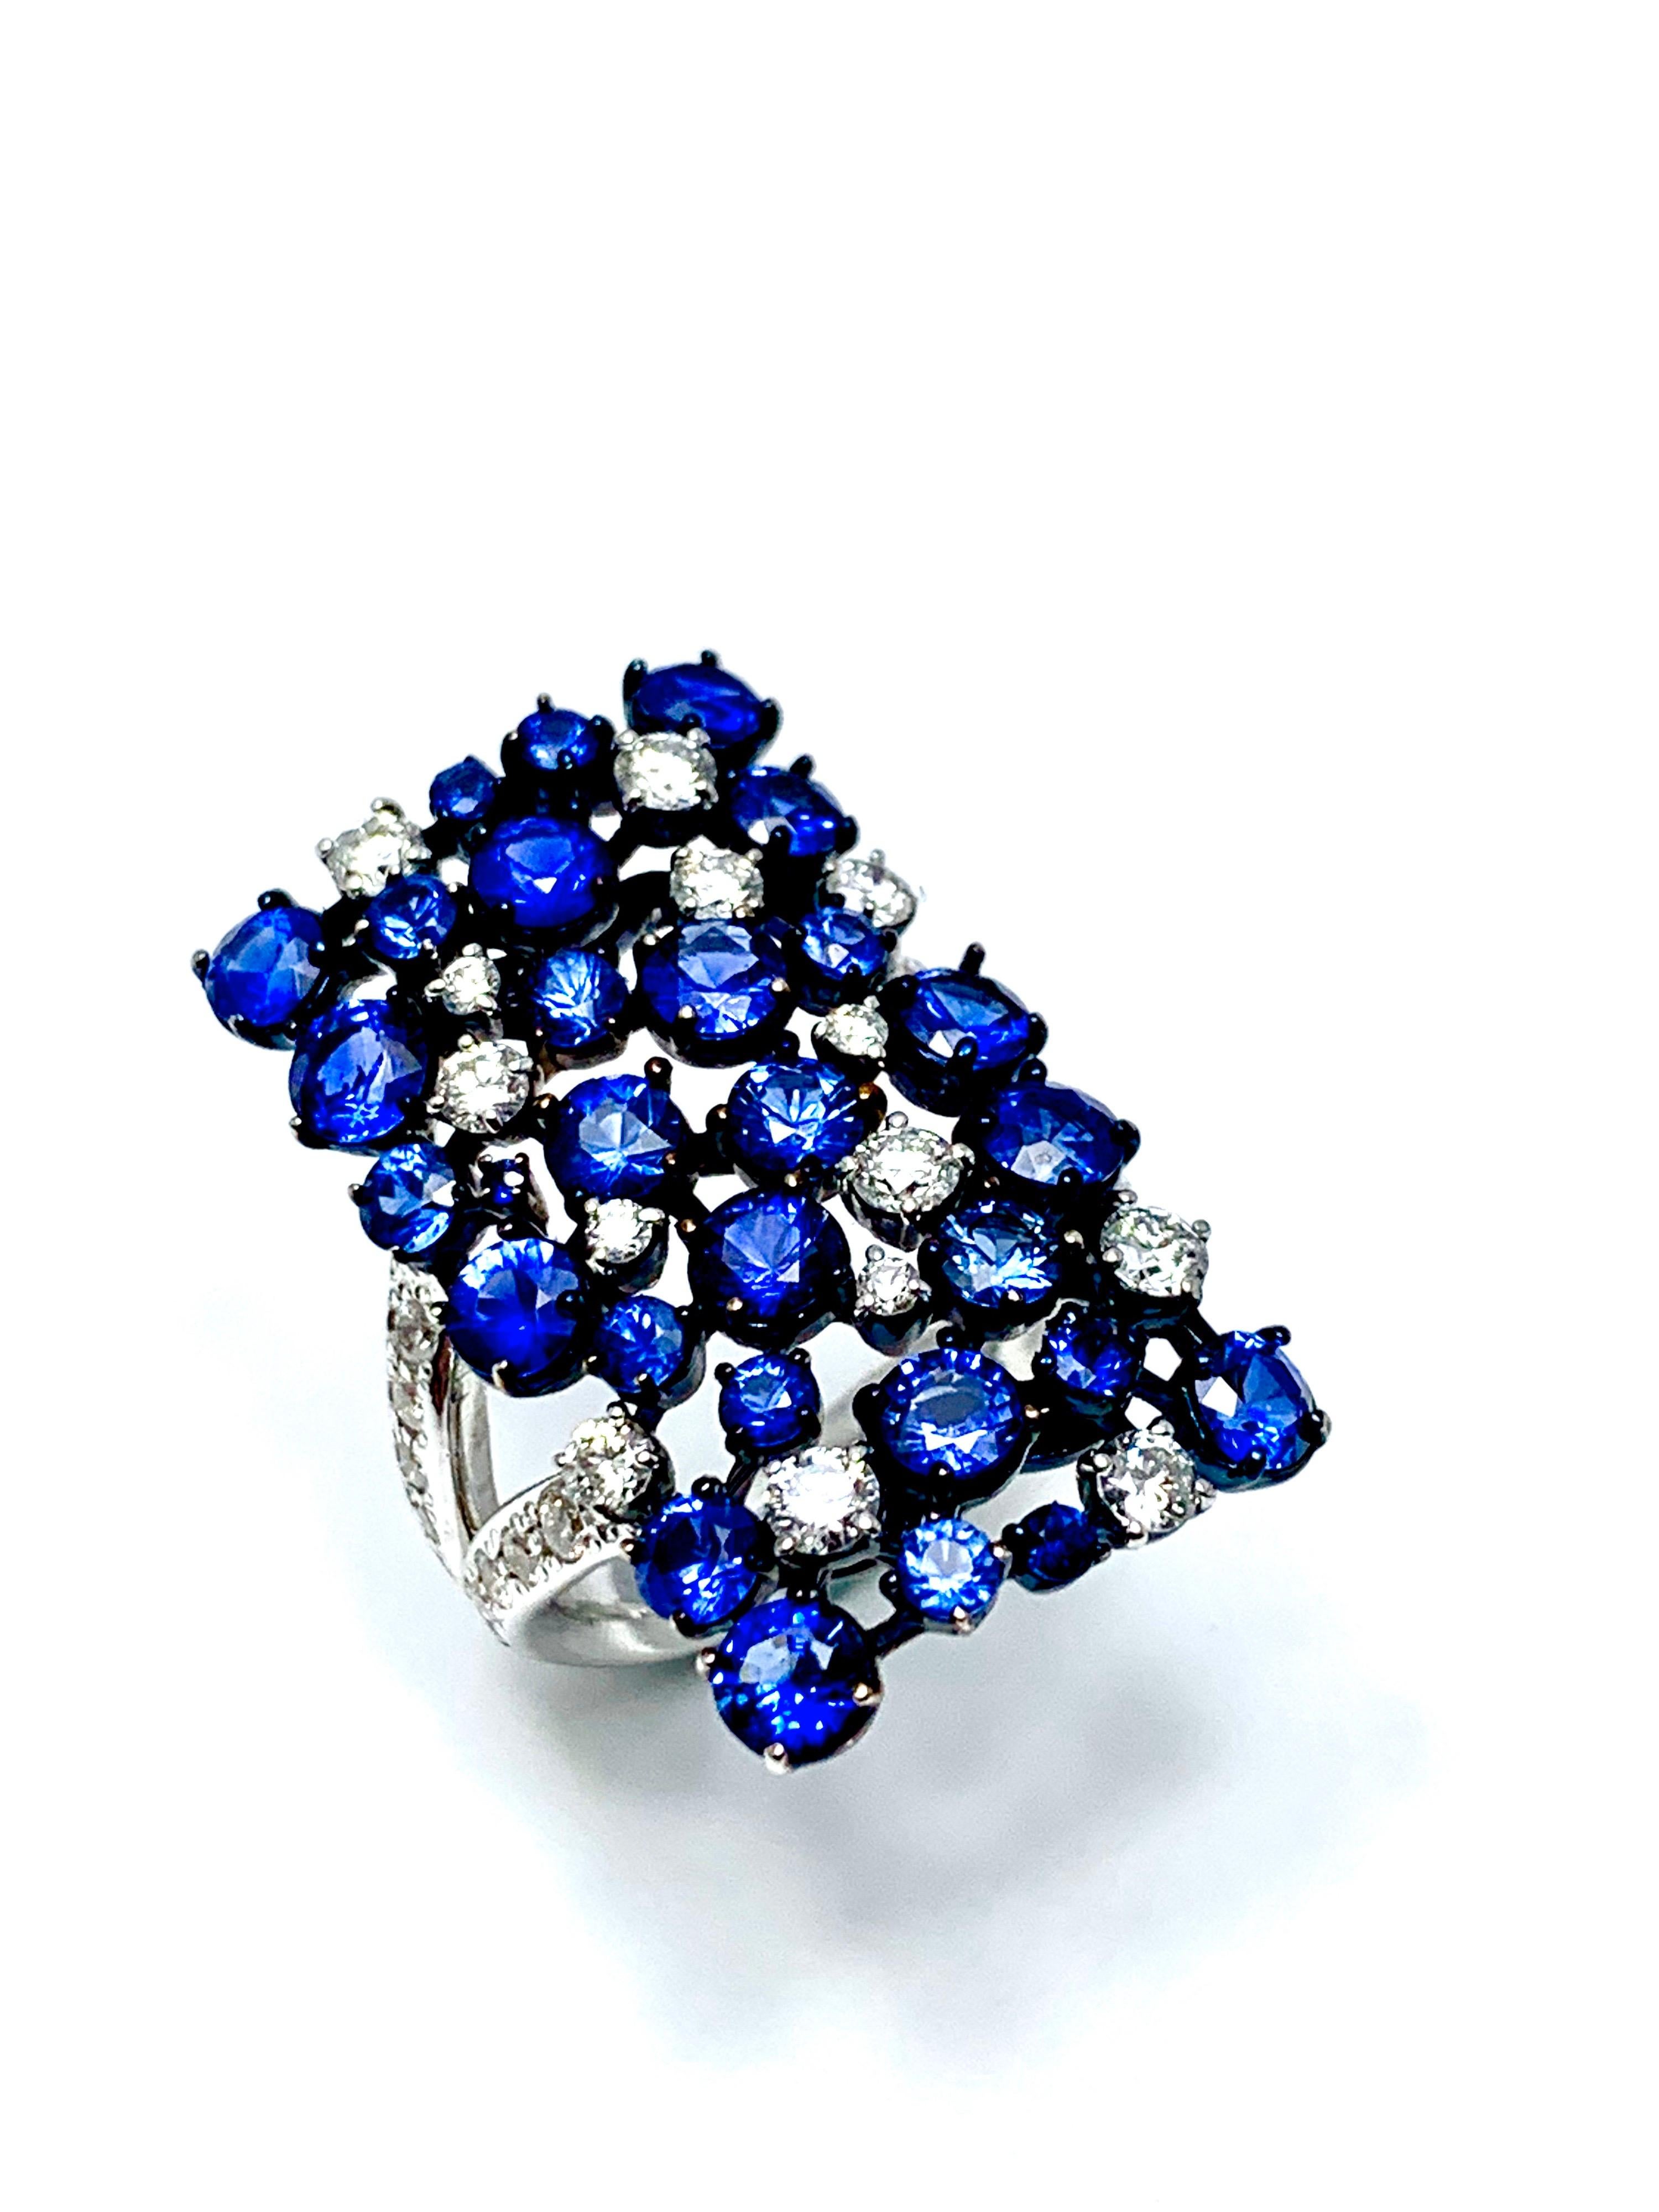 Handcrafted in Italy by Mariani Gioielli this stunning 18k white and blue gold ring will make a statement.  Adorned with 5.15 carats of round faceted sapphires, and 1.50 carats of round brilliant diamonds, this ring is a show stopper.  The diamonds